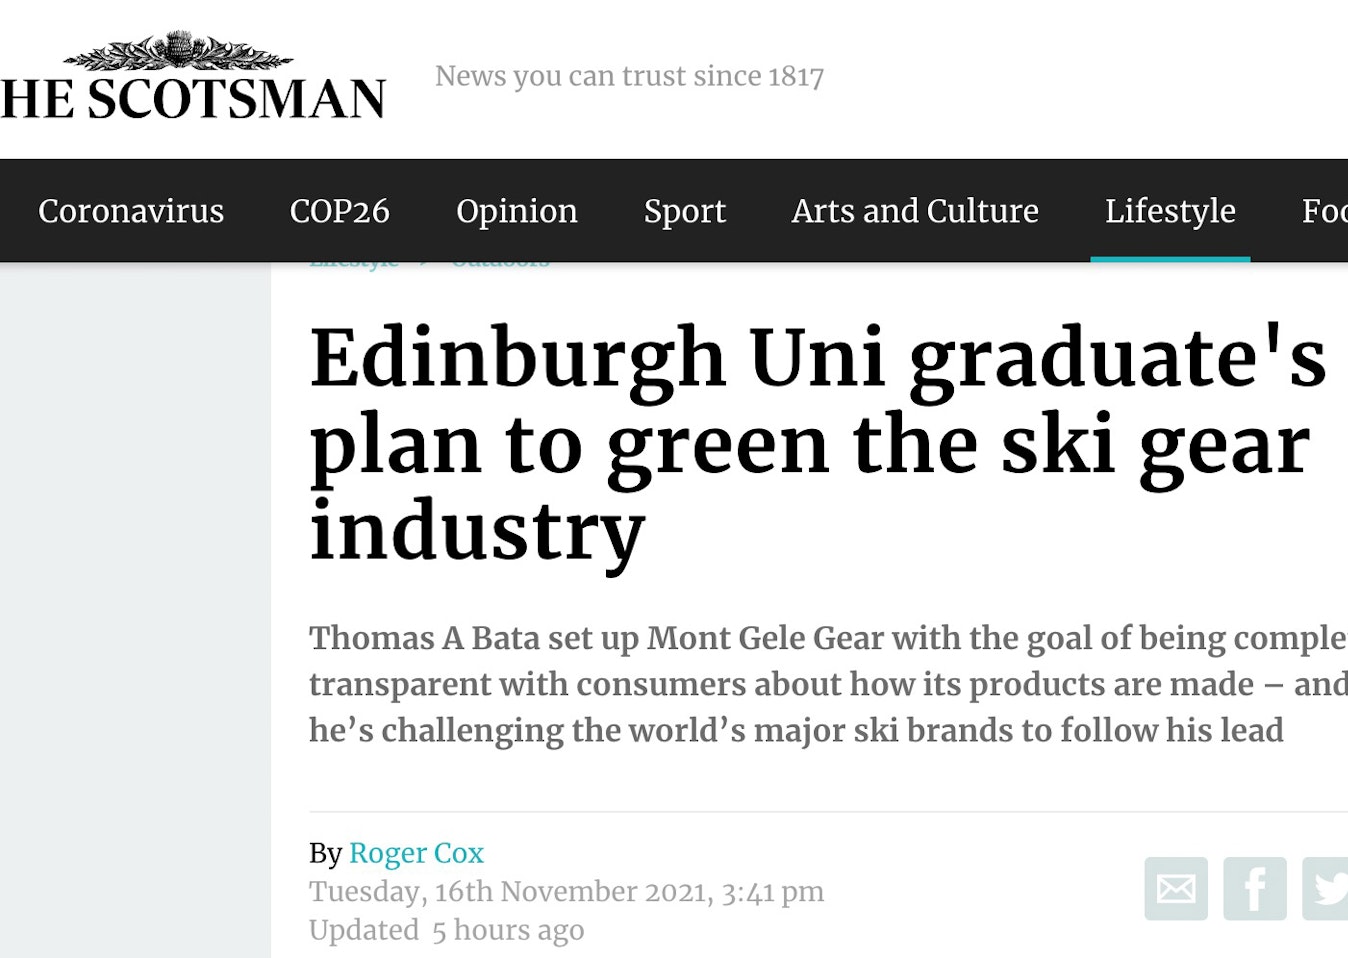 05 The Scotsman Article